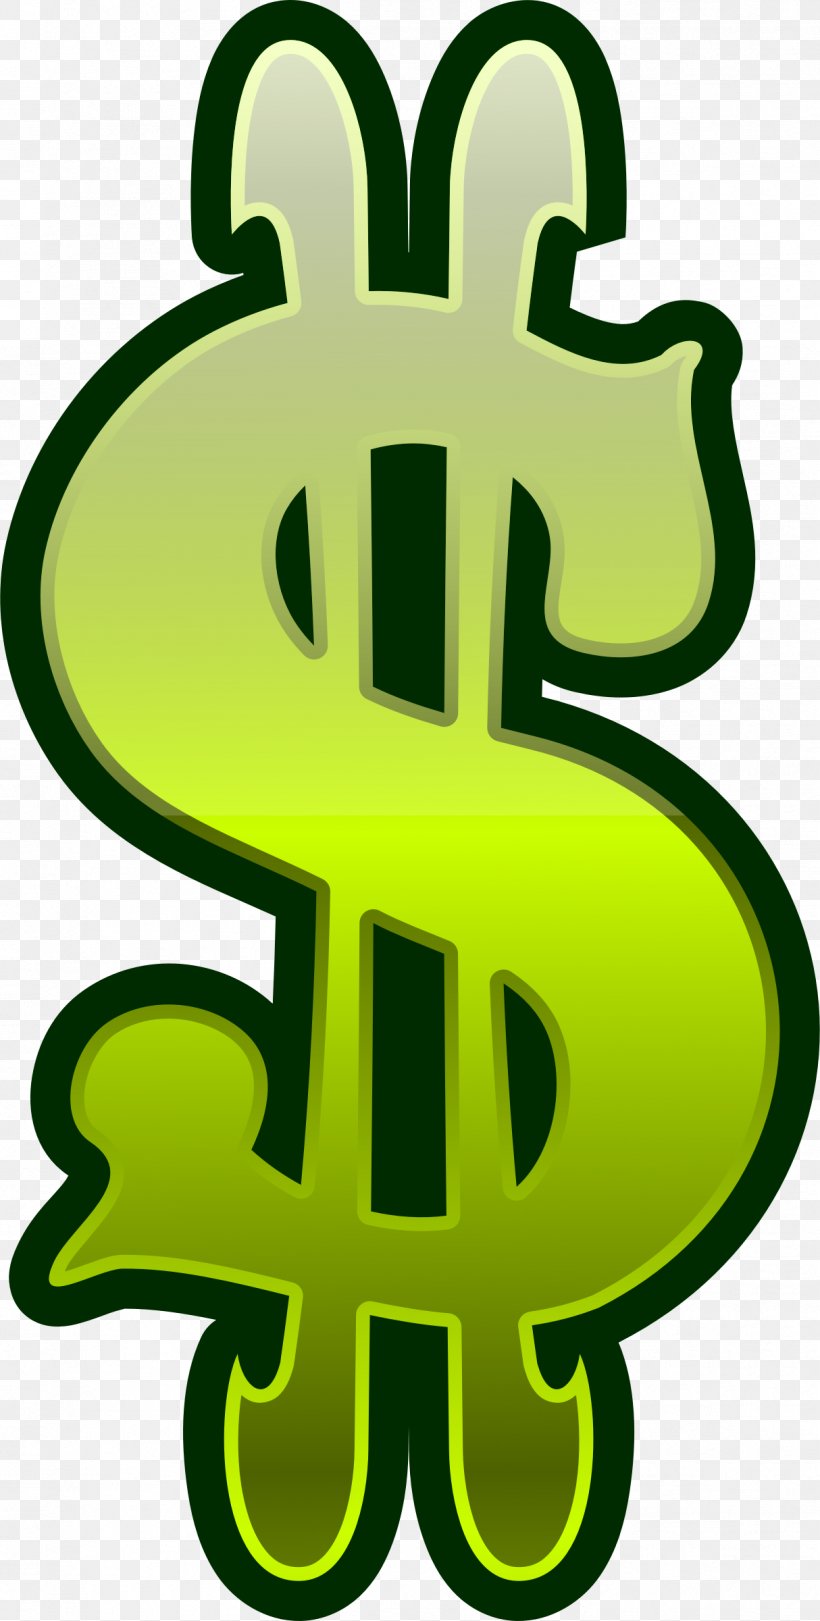 Dollar Sign Currency Symbol Clip Art, PNG, 1214x2400px, Dollar Sign, Australian Dollar, Currency Symbol, Dollar, Green Download Free